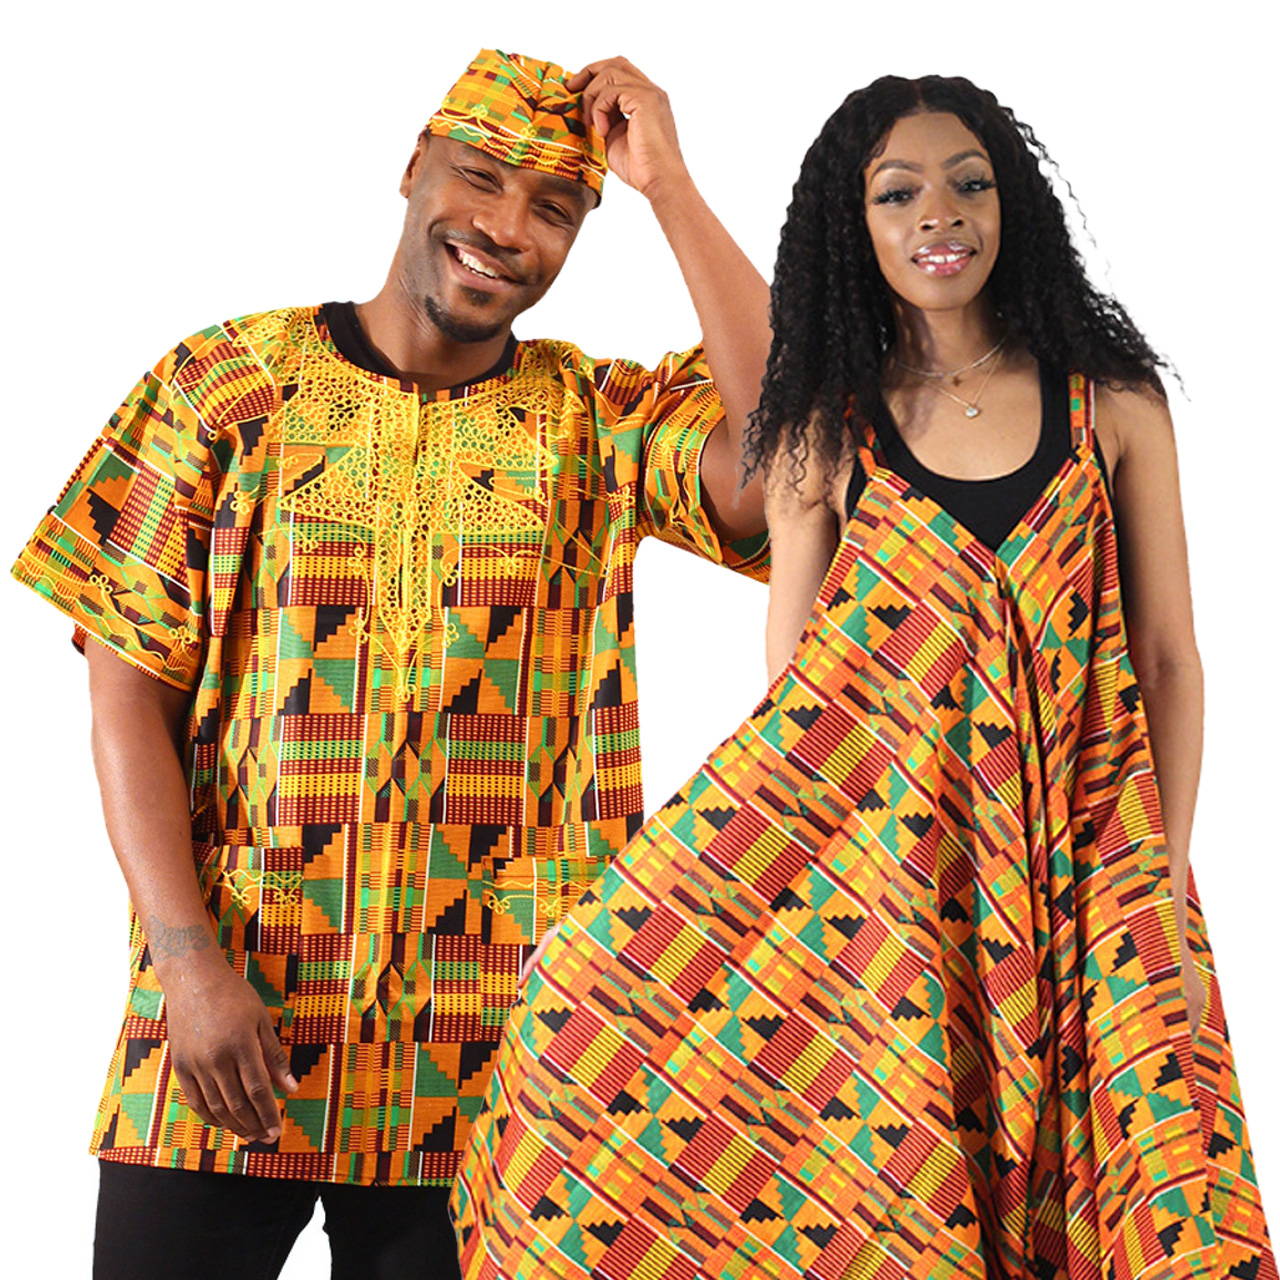 Wholesale African Clothing - Dashikis, Dresses, Pants & More - Page 11